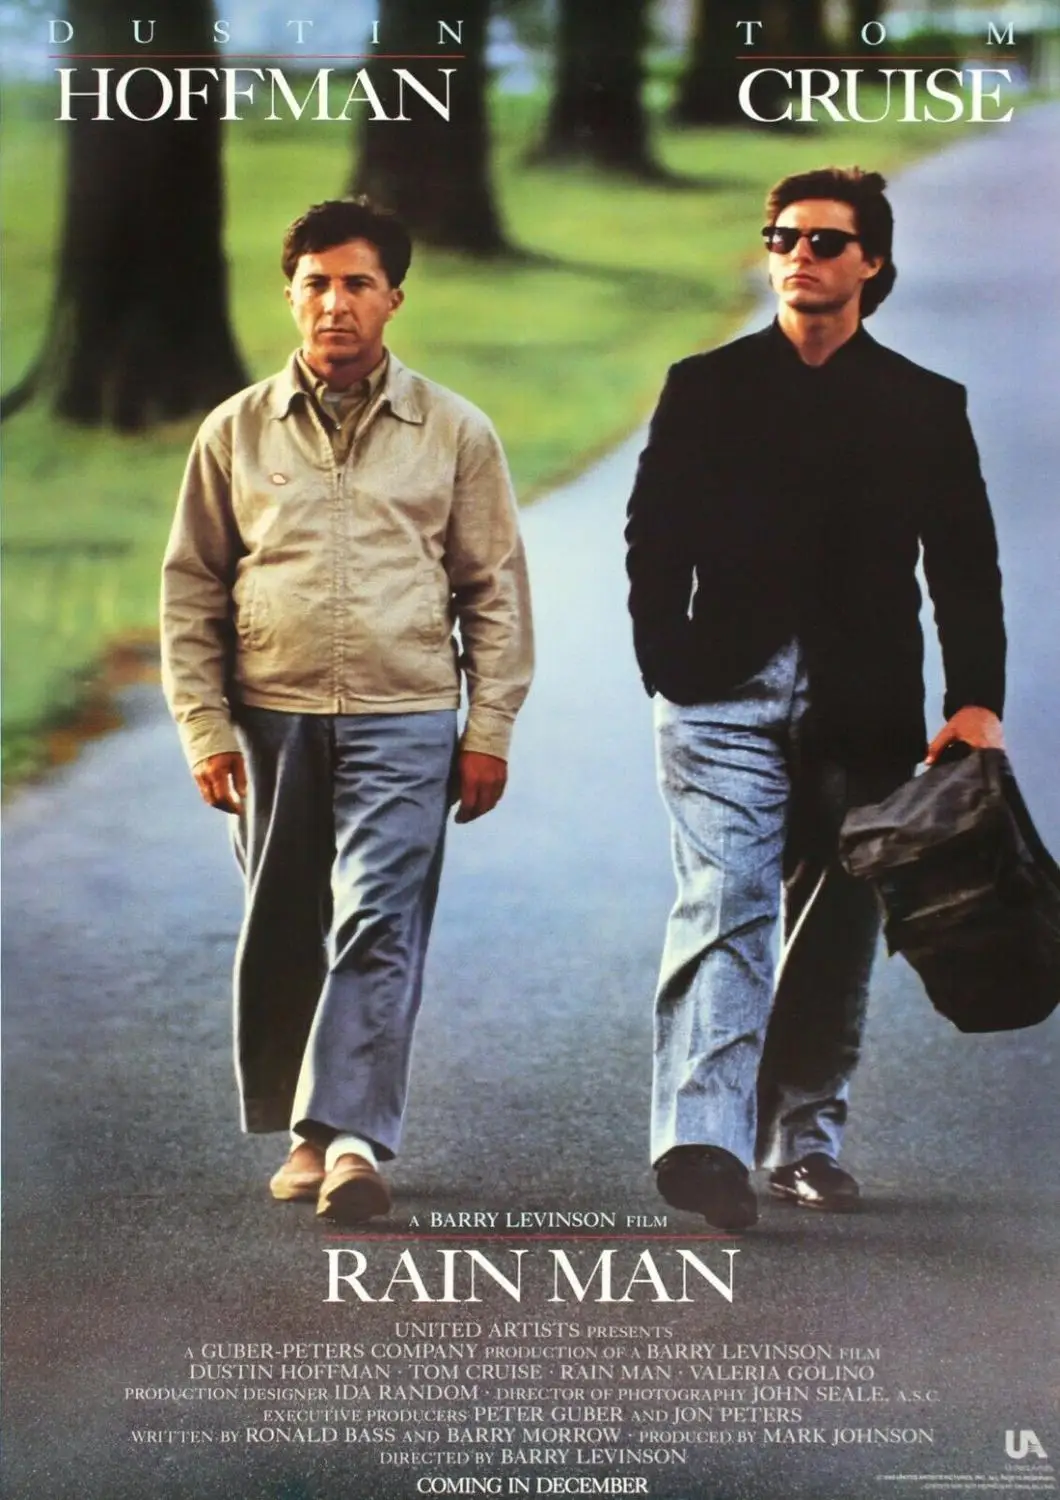 

6Style Choose Rain Man Movie Art Film Print Silk Poster for Your Home Wall Decor 24x36inch